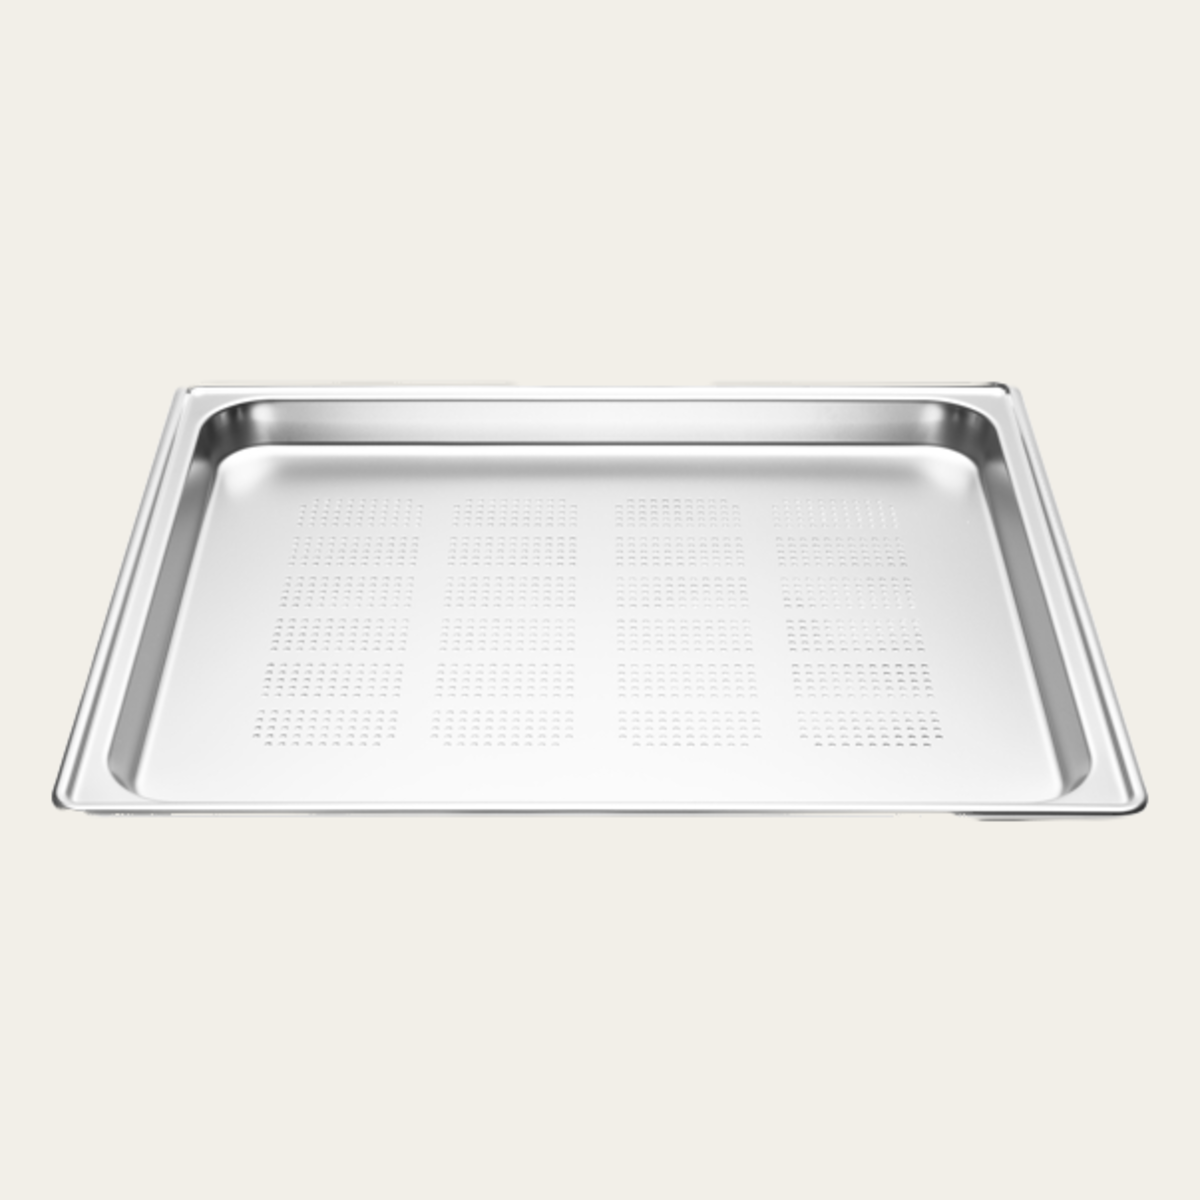 Stainless steel tray perforated, Amendment 2